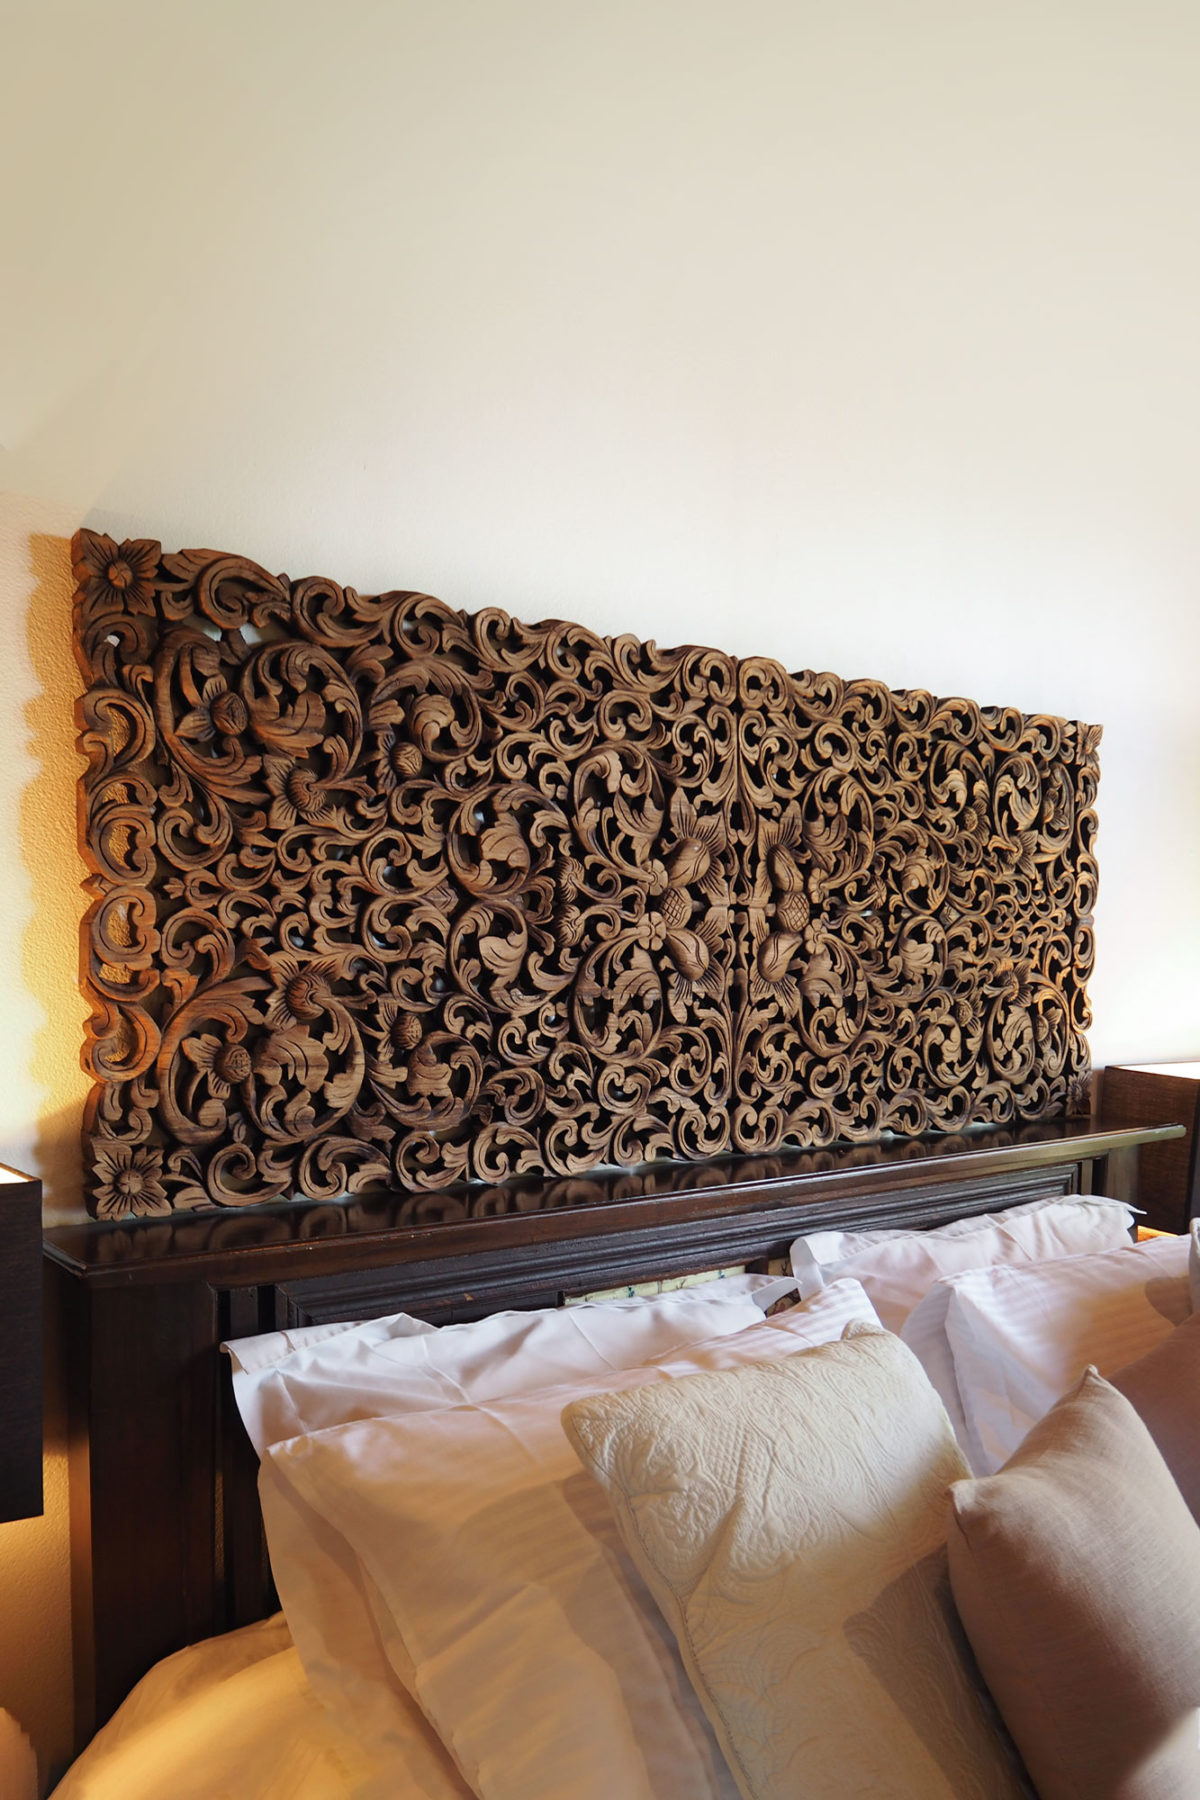 Bed headboard king size hand-carved wall art mounting dark walnut wood stain 72 inches